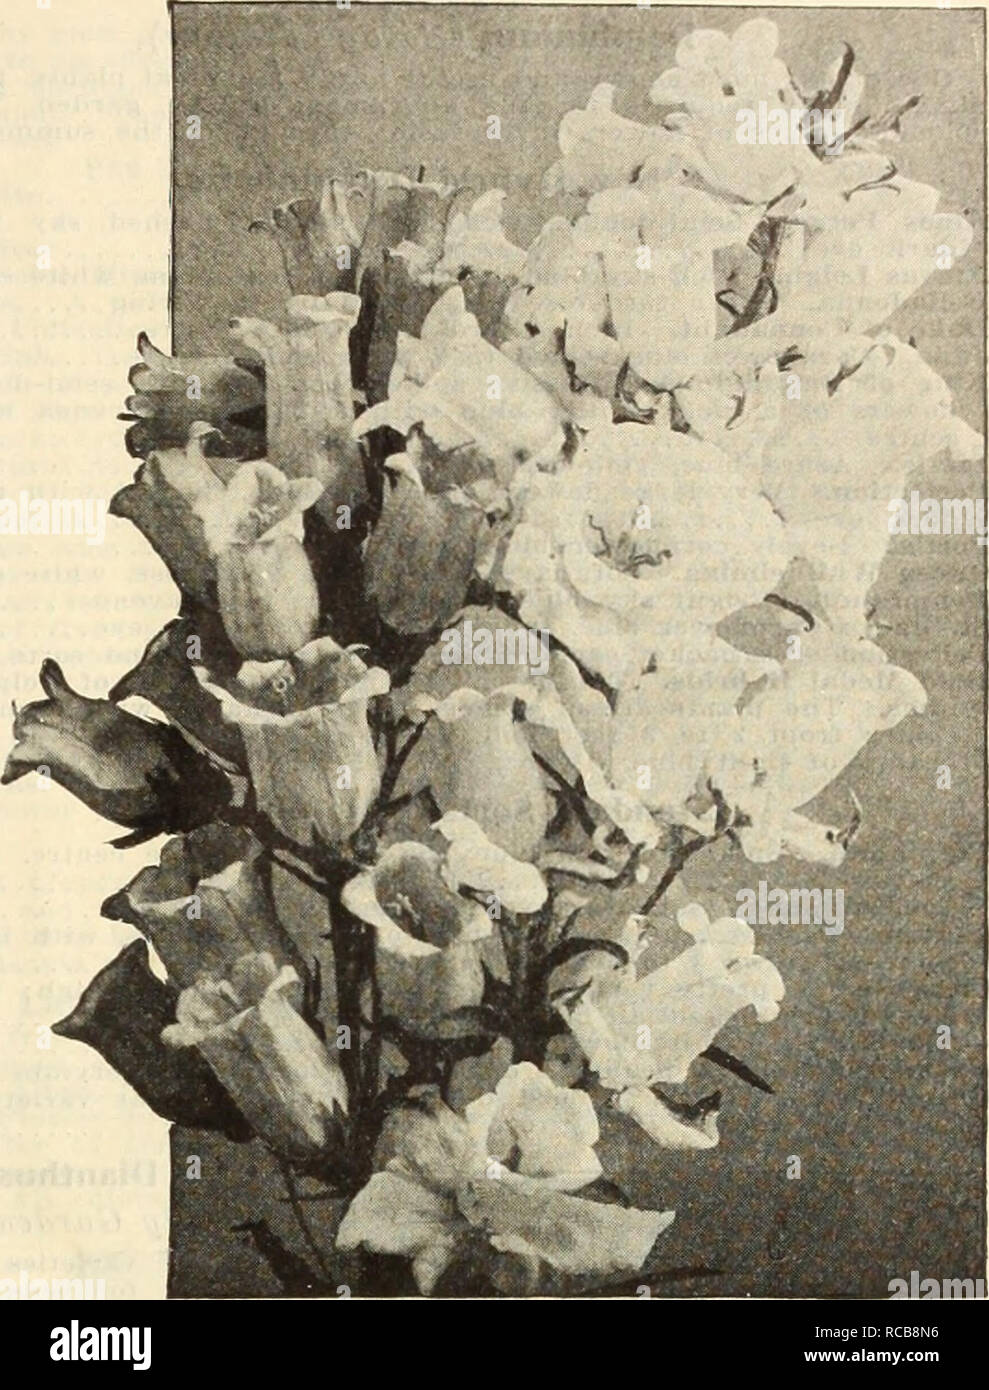 . Dreer's autumn catalogue, 1913. Horticultural products industry Catalogs; Nurseries (Horticulture) Catalogs; Nursery stock Catalogs; Plants, Ornamental Catalogs; Flowers Catalogs. (DlfHwafADIfflt-lflllADBHUA-M- RELIABLE f LOWER SEEDS 65 Campanula (Bellflower). pER Pkt. Carpatiea (Carpathian Hare-Bell). In bloom the whole season: hardy perennial; blue; 6 inches. Per % oz., 25 cts r&gt; —Alba. White flowered form. Per hi oz., 25 ets a (.lomerata (Clustered Bellflower). Violet blue 15 Grandis (Great Bellflower). Large saucer-shaped violet blue flowers 10 Latifolia Maerantha. A handsome variety, Stock Photo